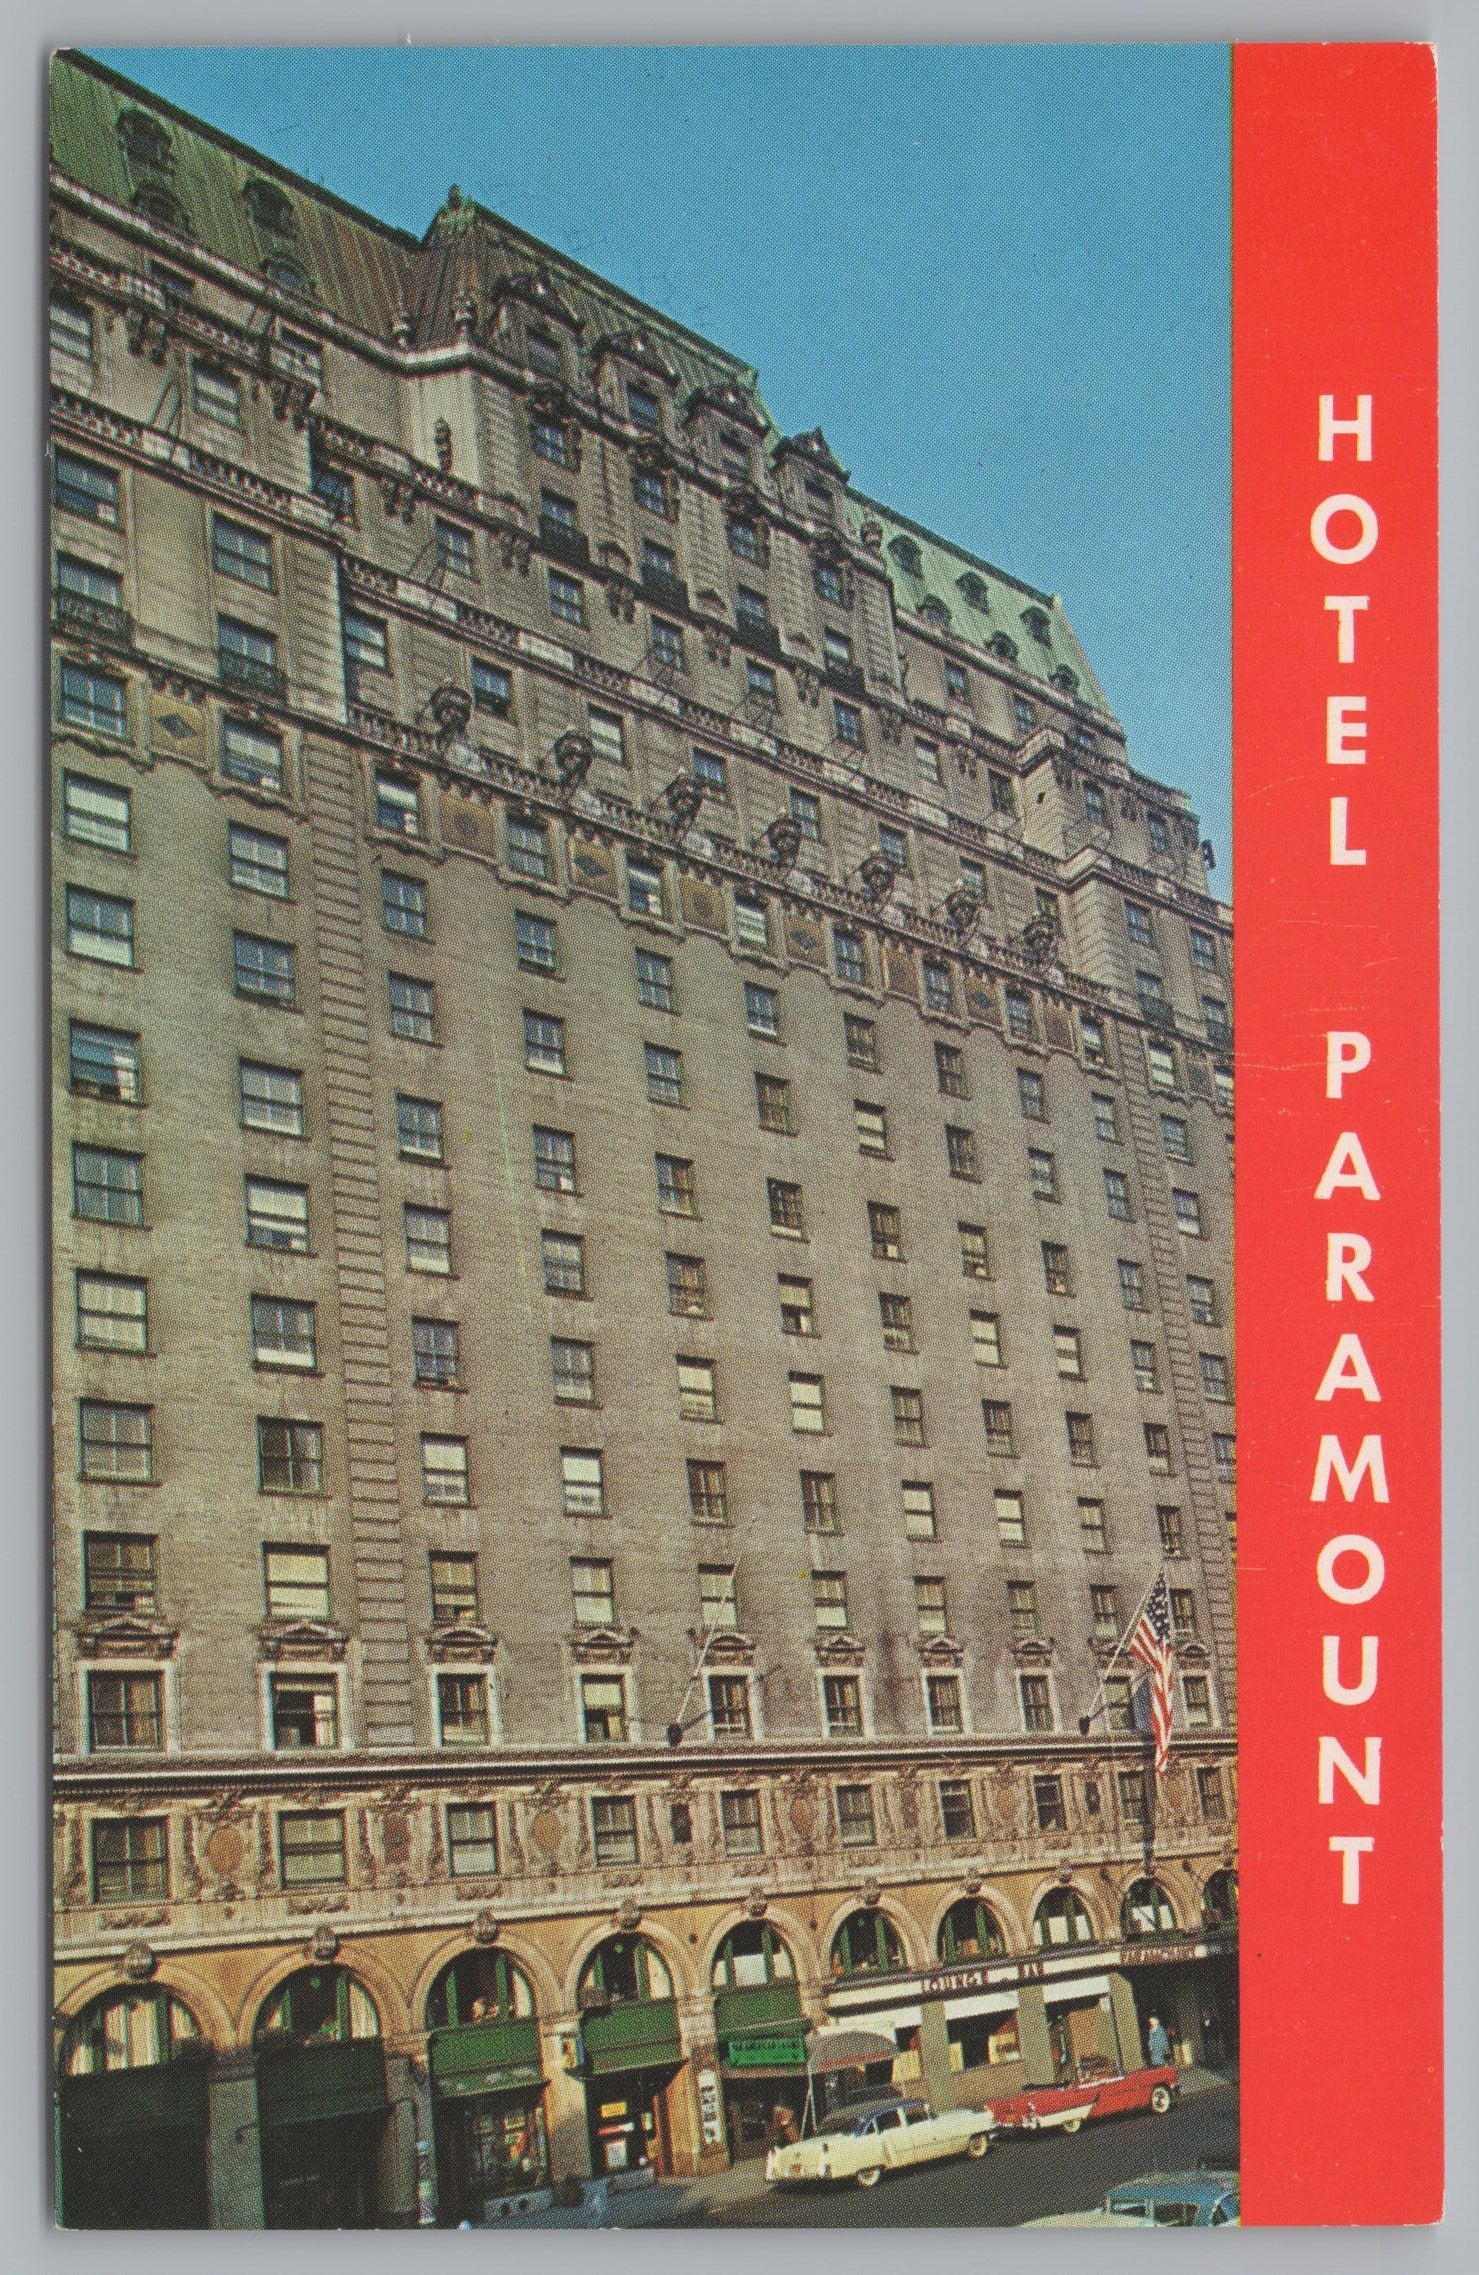 Hotel Paramount, 46th Street, West Of Broadway, New York, Vintage Post Card.